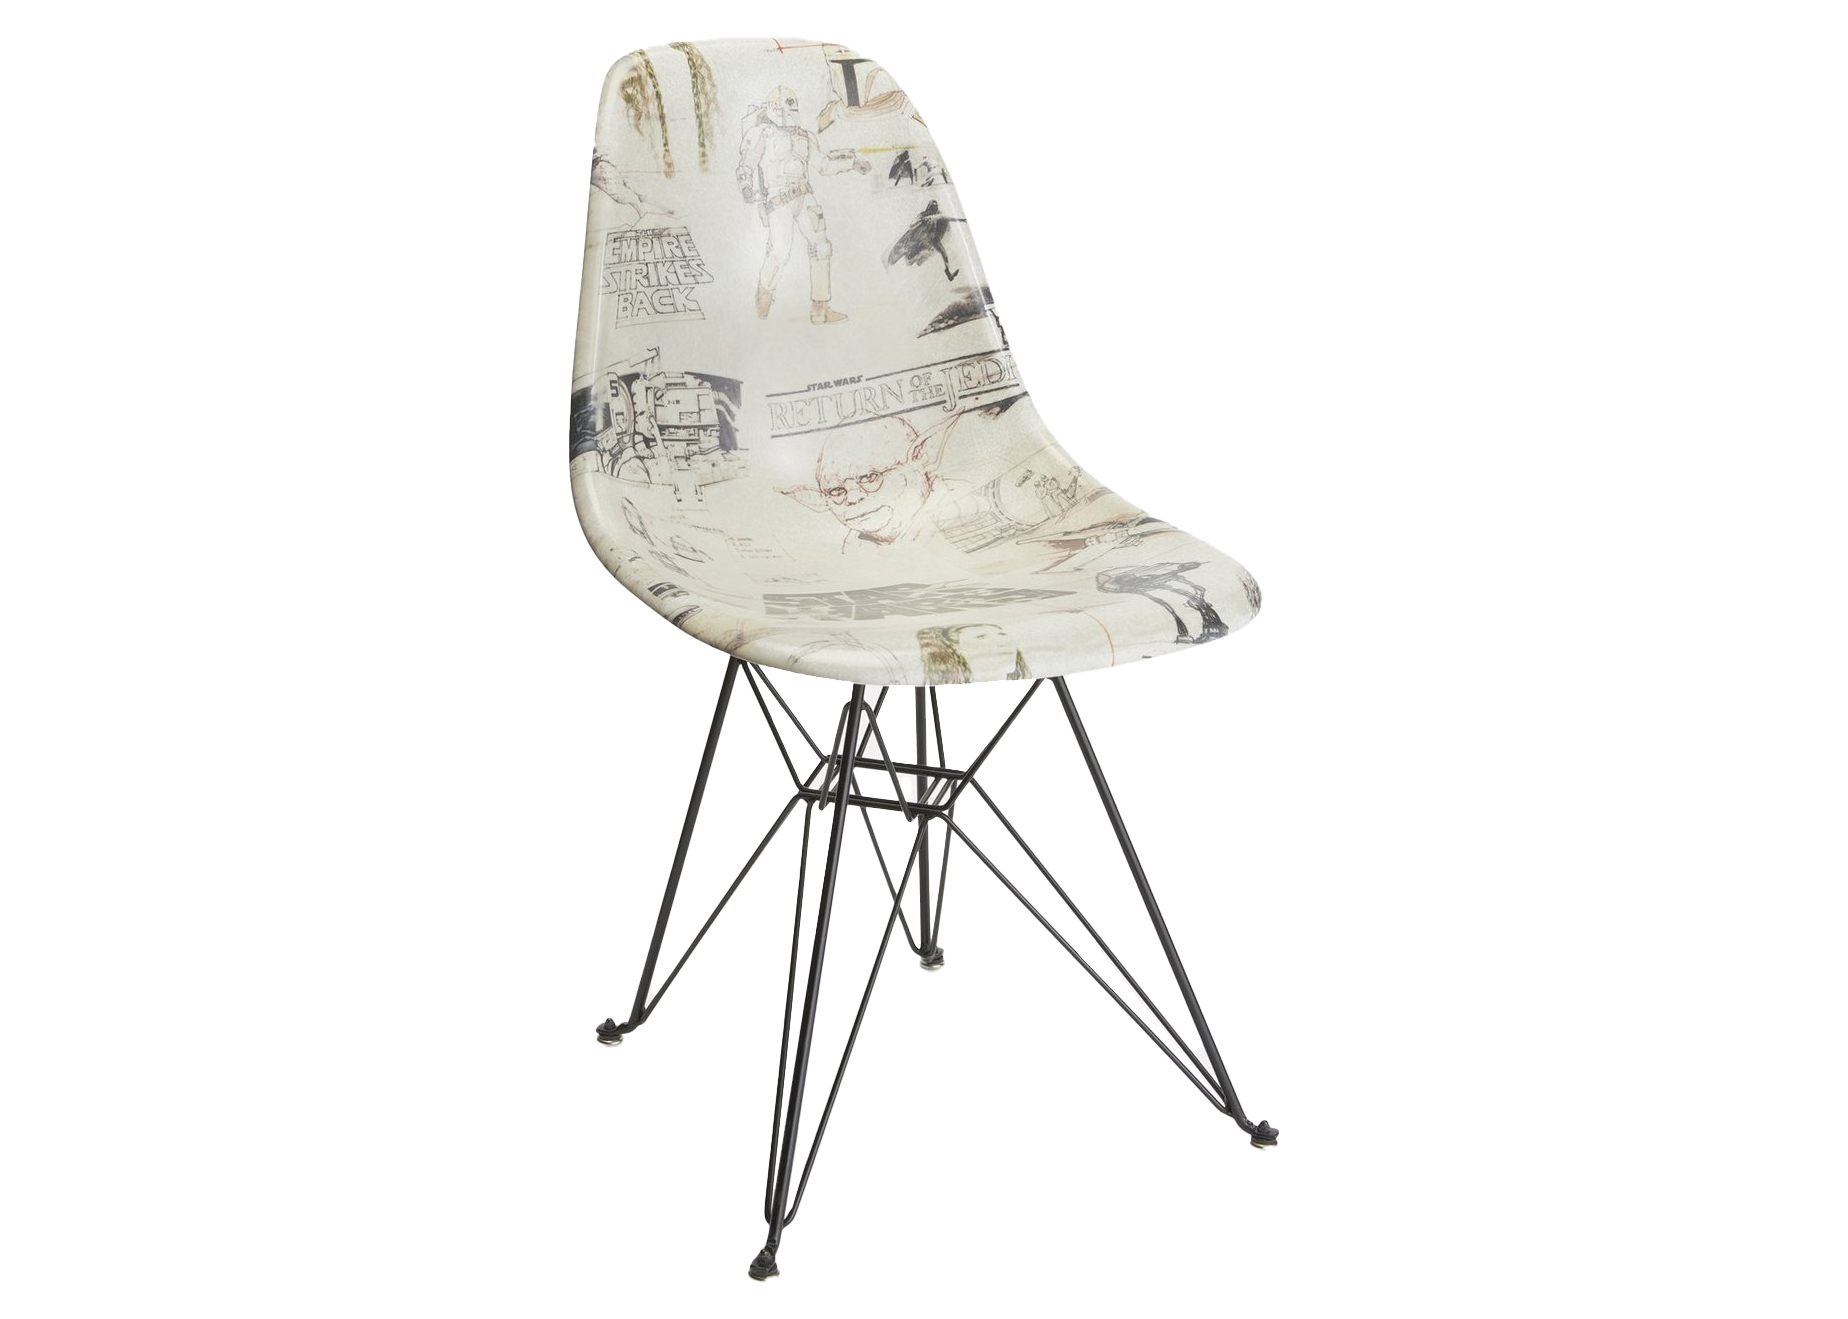 Kith x STAR WARS for Modernica Case Study Shell Chair Multi